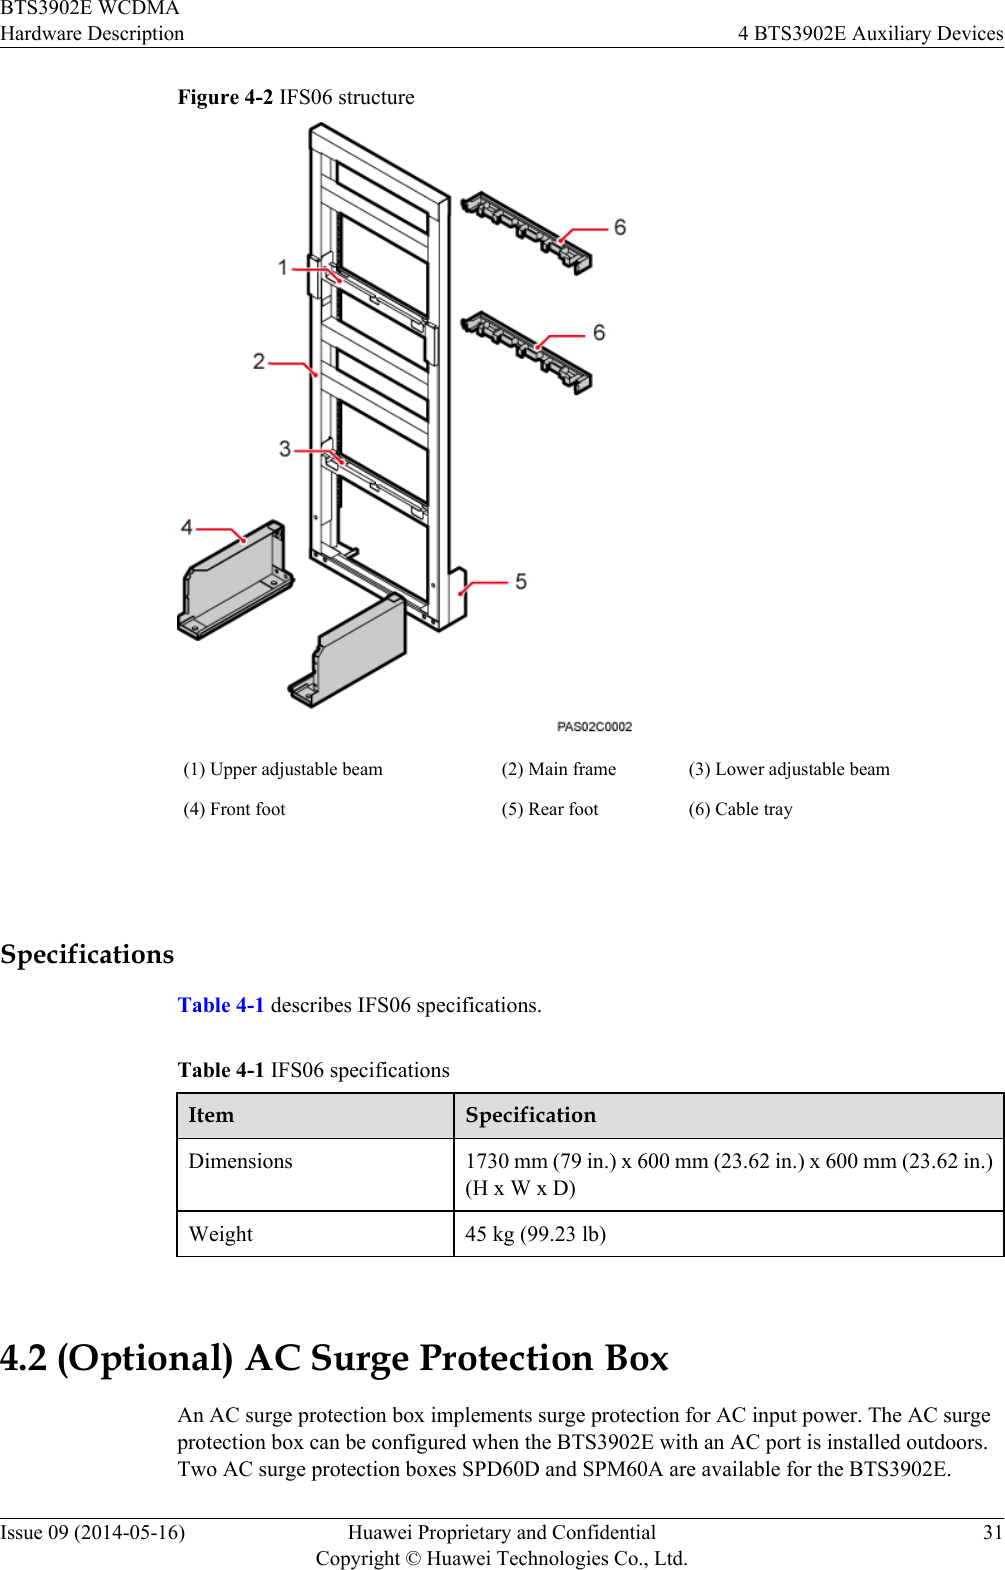 Figure 4-2 IFS06 structure(1) Upper adjustable beam (2) Main frame (3) Lower adjustable beam(4) Front foot (5) Rear foot (6) Cable tray SpecificationsTable 4-1 describes IFS06 specifications.Table 4-1 IFS06 specificationsItem SpecificationDimensions 1730 mm (79 in.) x 600 mm (23.62 in.) x 600 mm (23.62 in.)(H x W x D)Weight 45 kg (99.23 lb) 4.2 (Optional) AC Surge Protection BoxAn AC surge protection box implements surge protection for AC input power. The AC surgeprotection box can be configured when the BTS3902E with an AC port is installed outdoors.Two AC surge protection boxes SPD60D and SPM60A are available for the BTS3902E.BTS3902E WCDMAHardware Description 4 BTS3902E Auxiliary DevicesIssue 09 (2014-05-16) Huawei Proprietary and ConfidentialCopyright © Huawei Technologies Co., Ltd.31